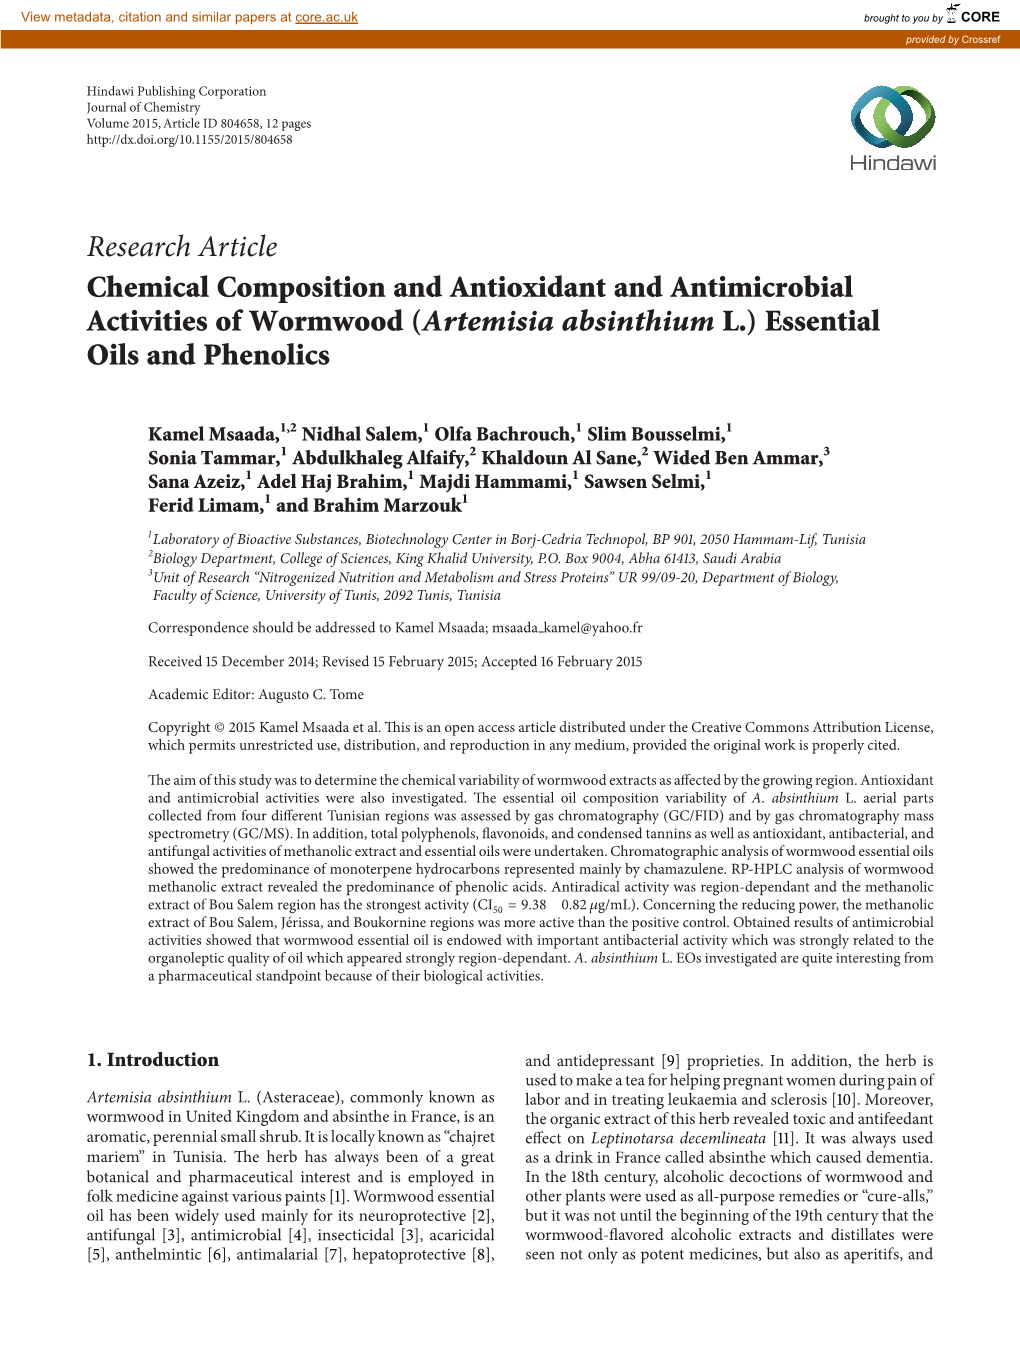 Research Article Chemical Composition and Antioxidant and Antimicrobial Activities of Wormwood (Artemisia Absinthium L.) Essential Oils and Phenolics